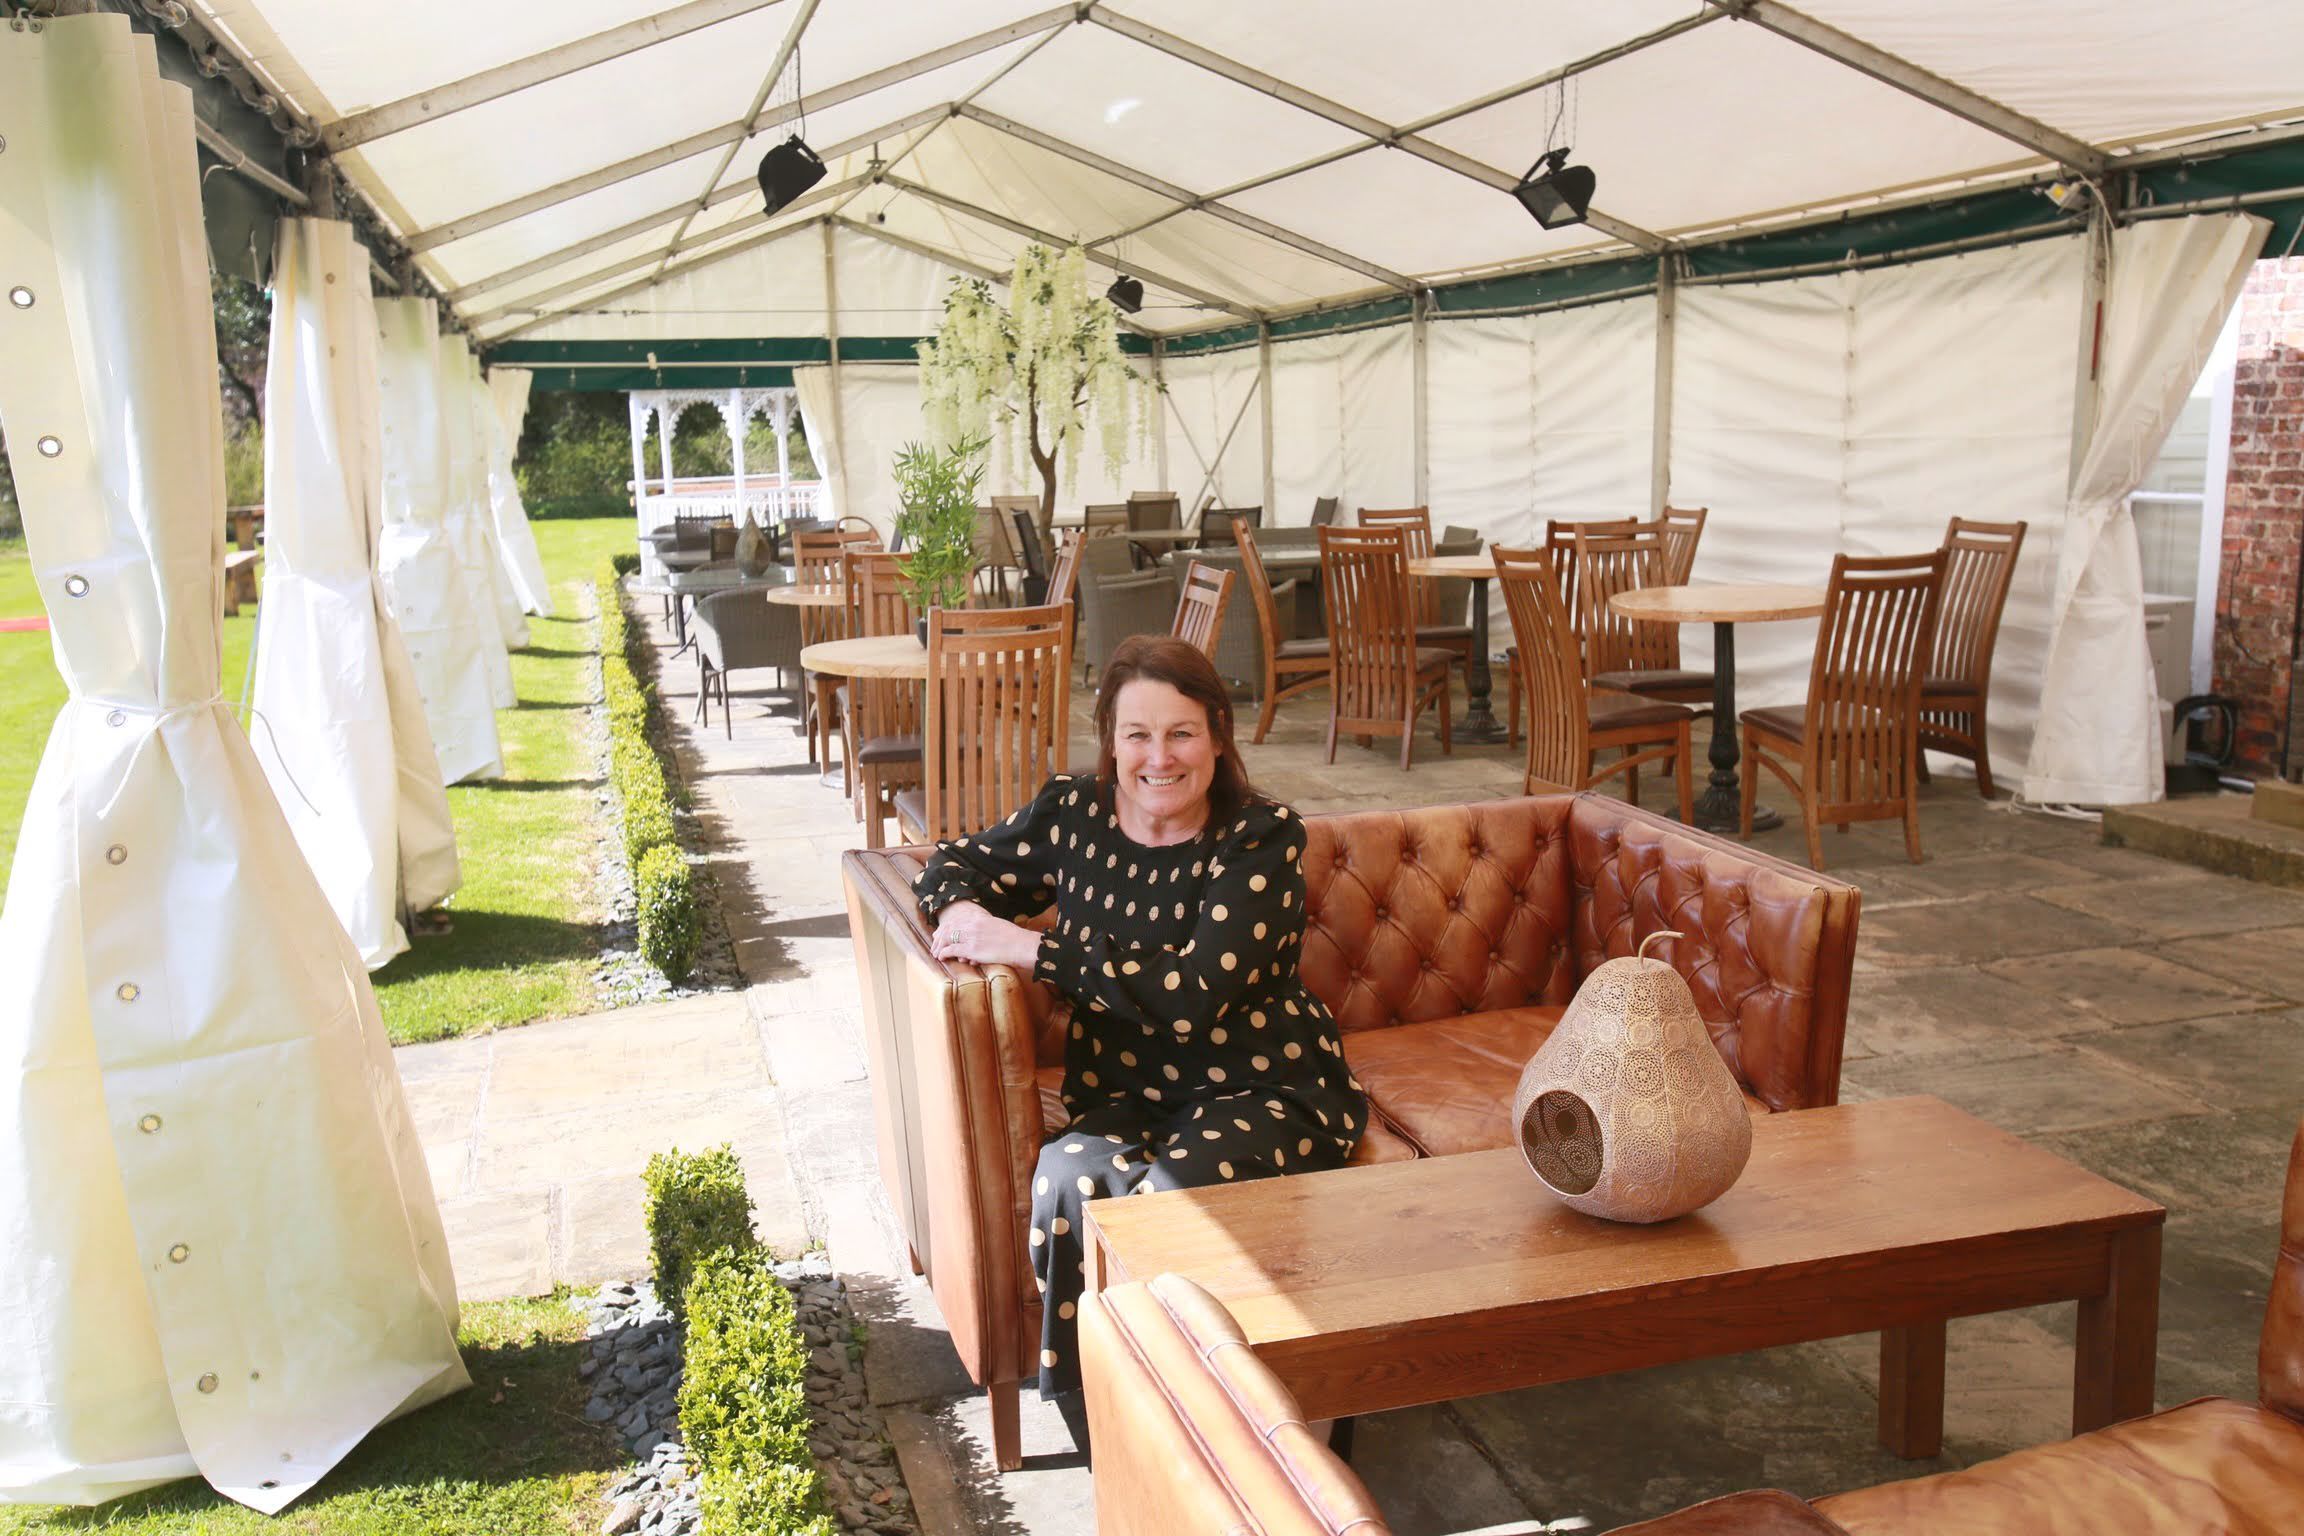 Dawn Raine, the general manager at the Blackwell Grange Hotel in the new outdoor area Picture: SARAH CALDECOTT